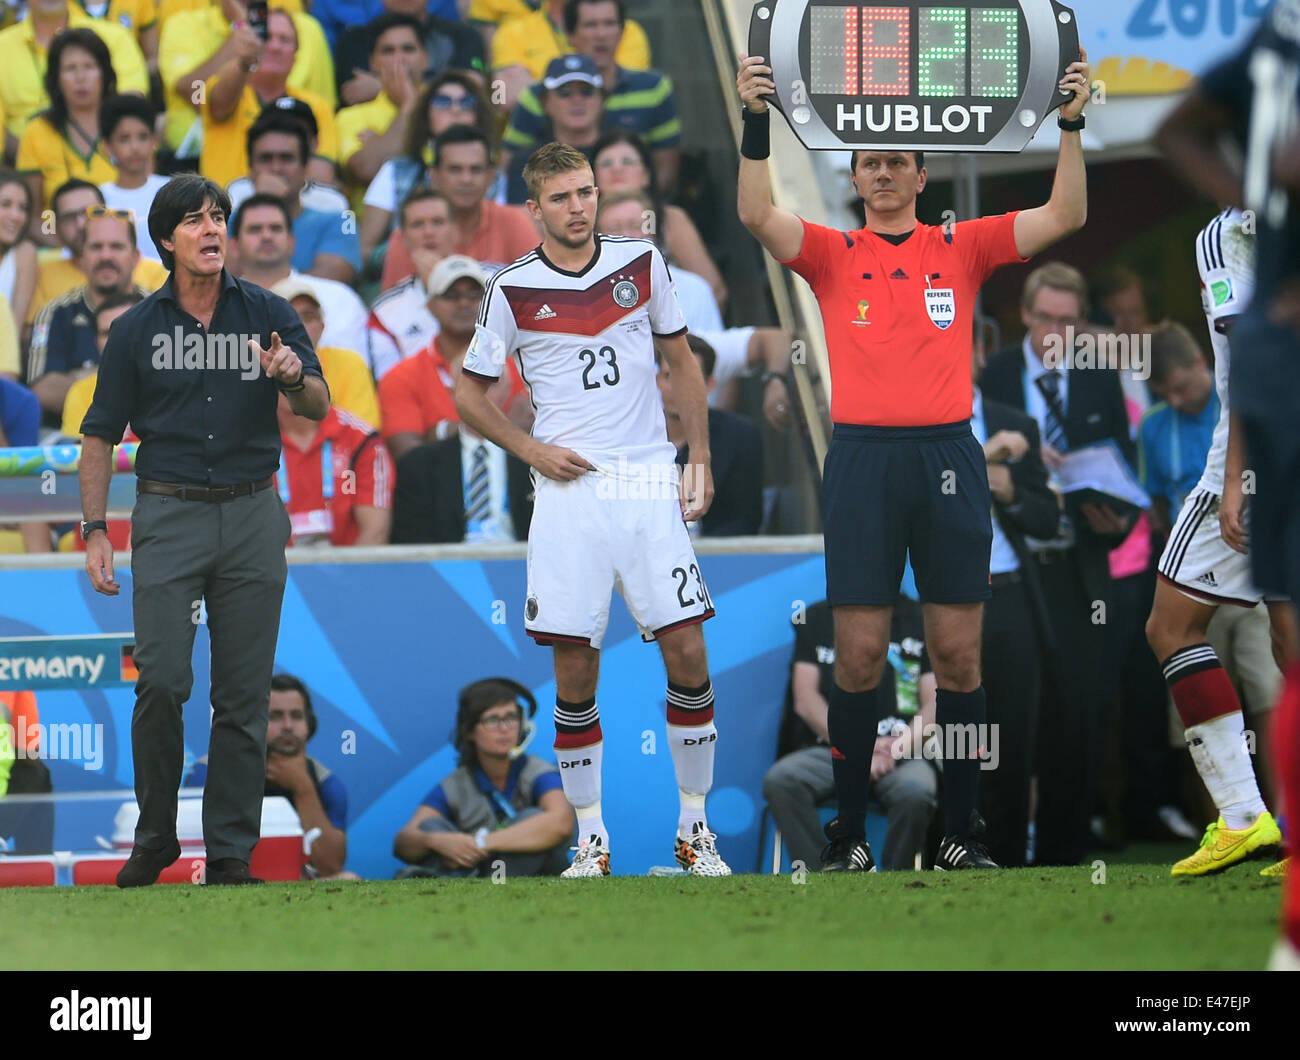 Rio de Janeiro, Brazil. 04th July, 2014. Head coach Joachim Loew (L) and Christoph Kramer of Germany during the FIFA World Cup 2014 quarter final soccer match between France and Germany at Estadio do Maracana in Rio de Janeiro, Brazil, 04 July 2014. Photo: Andreas Gebert/dpa/Alamy Live News Stock Photo